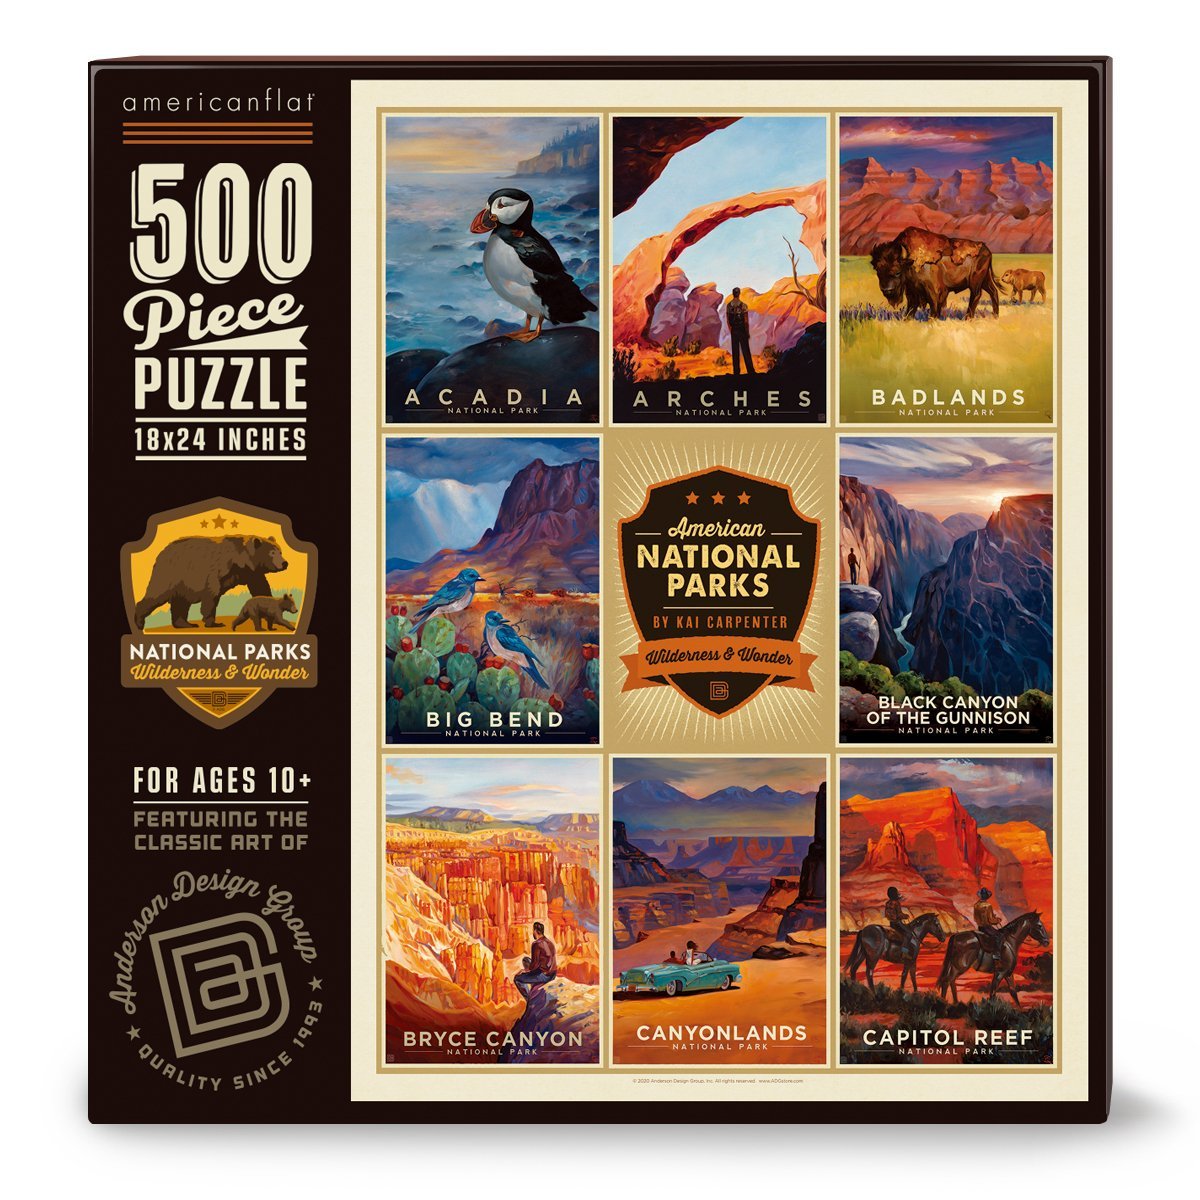 500 Piece Jigsaw Puzzle, 18x24 Inches, "American National Parks 1" Art by Anderson Design Group - Jigsaw Puzzle - Americanflat